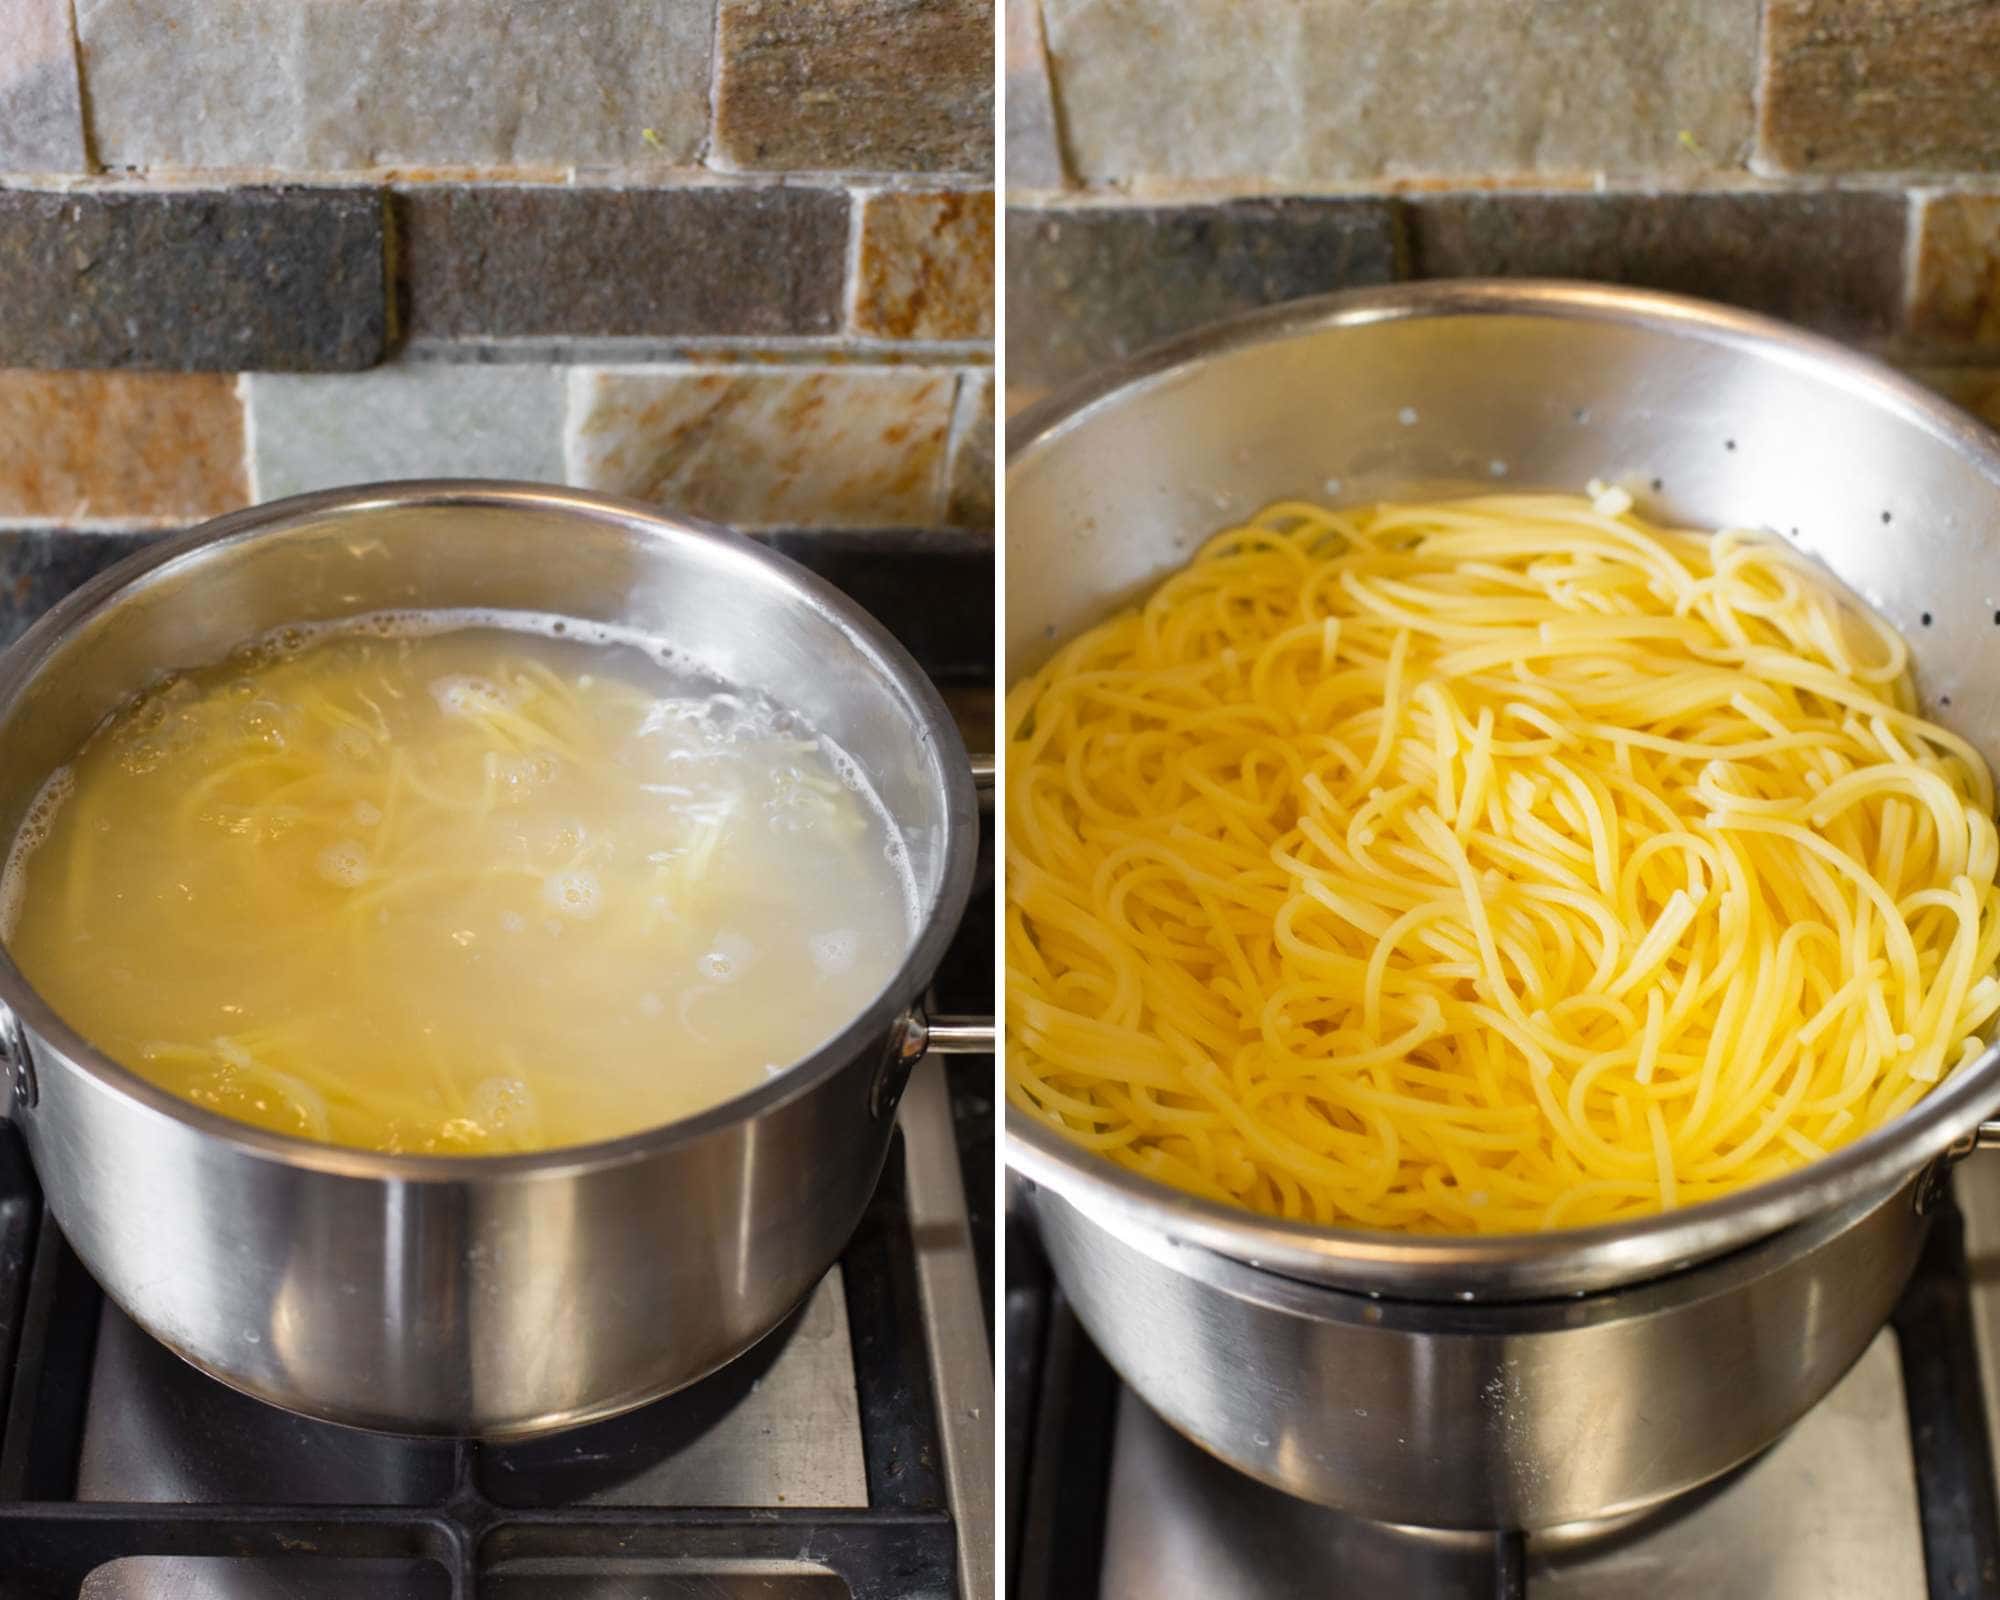 Spaghetti cooking in pot of boiling water on stovetop.